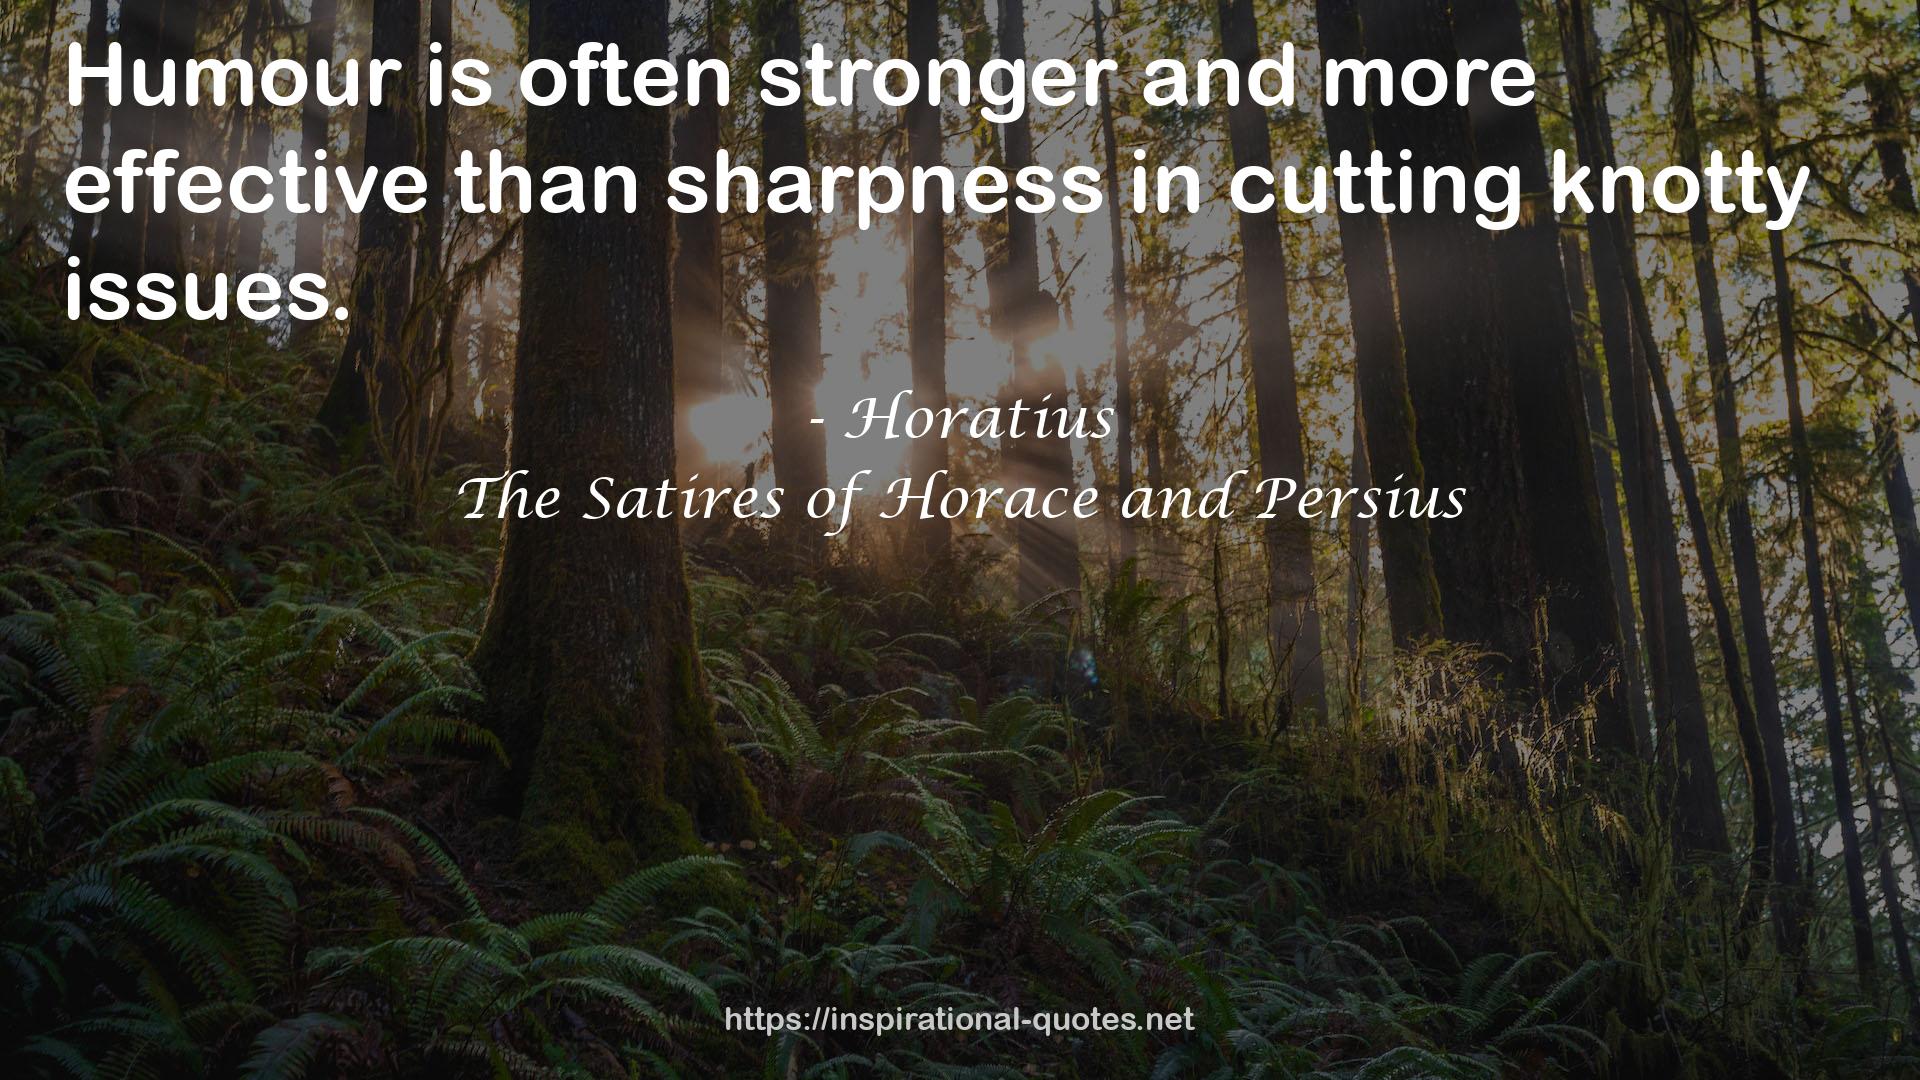 The Satires of Horace and Persius QUOTES